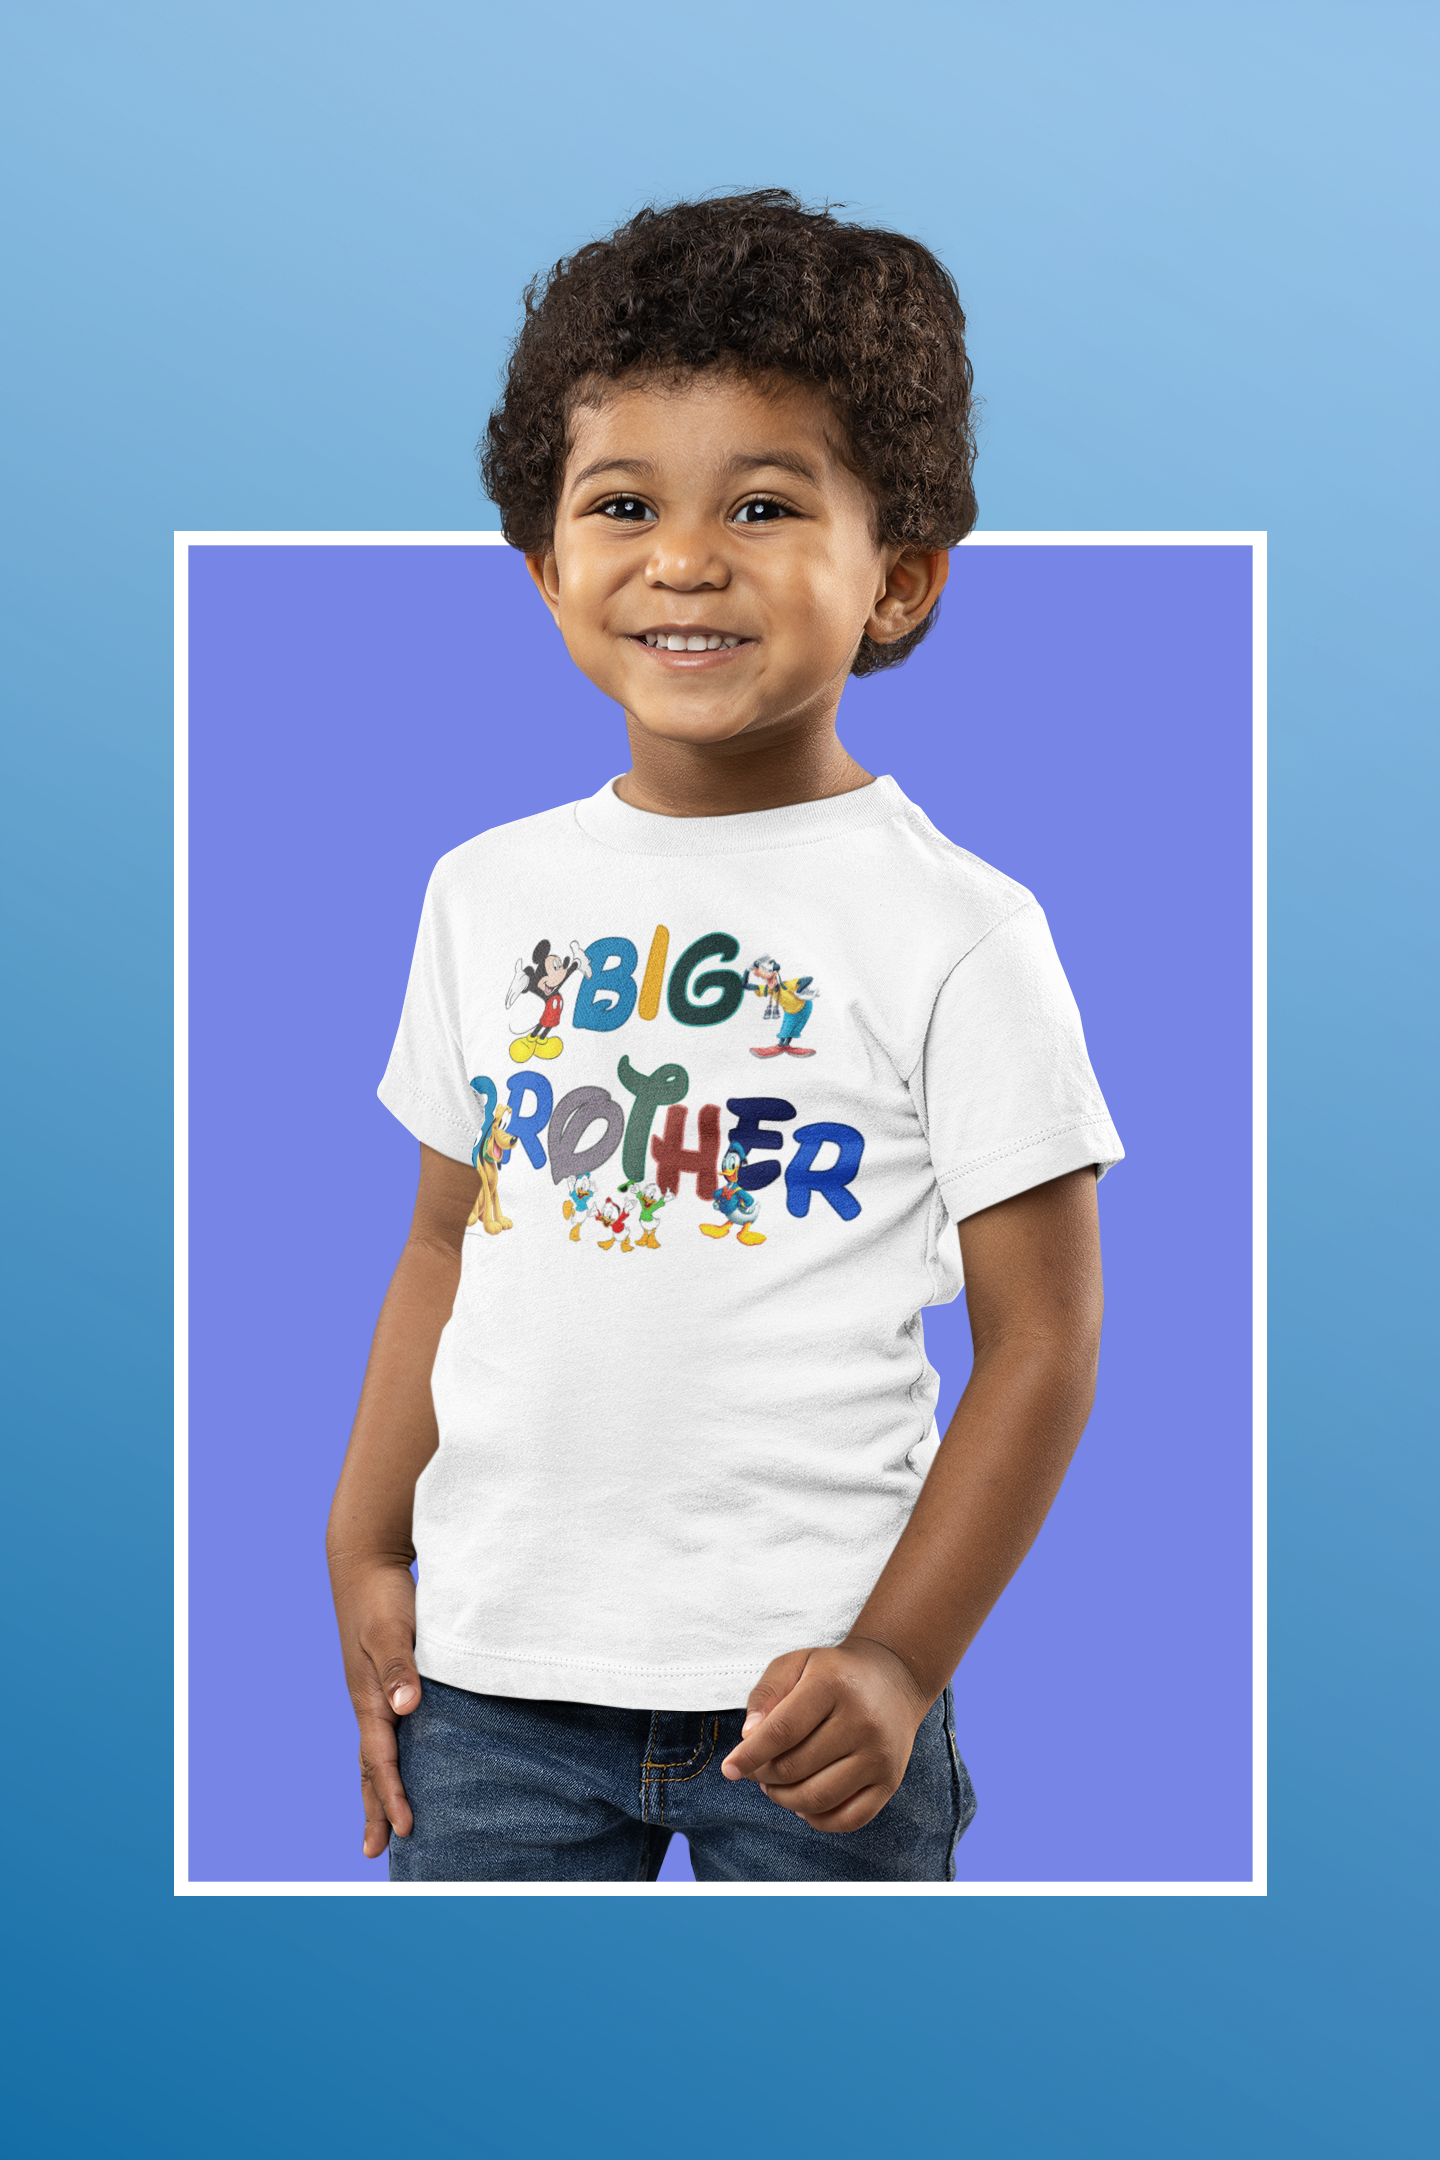 Big Brother Mickey shirt - Mickey  and friends shirts - Big  Brother boys shirt - Big Brother shirt